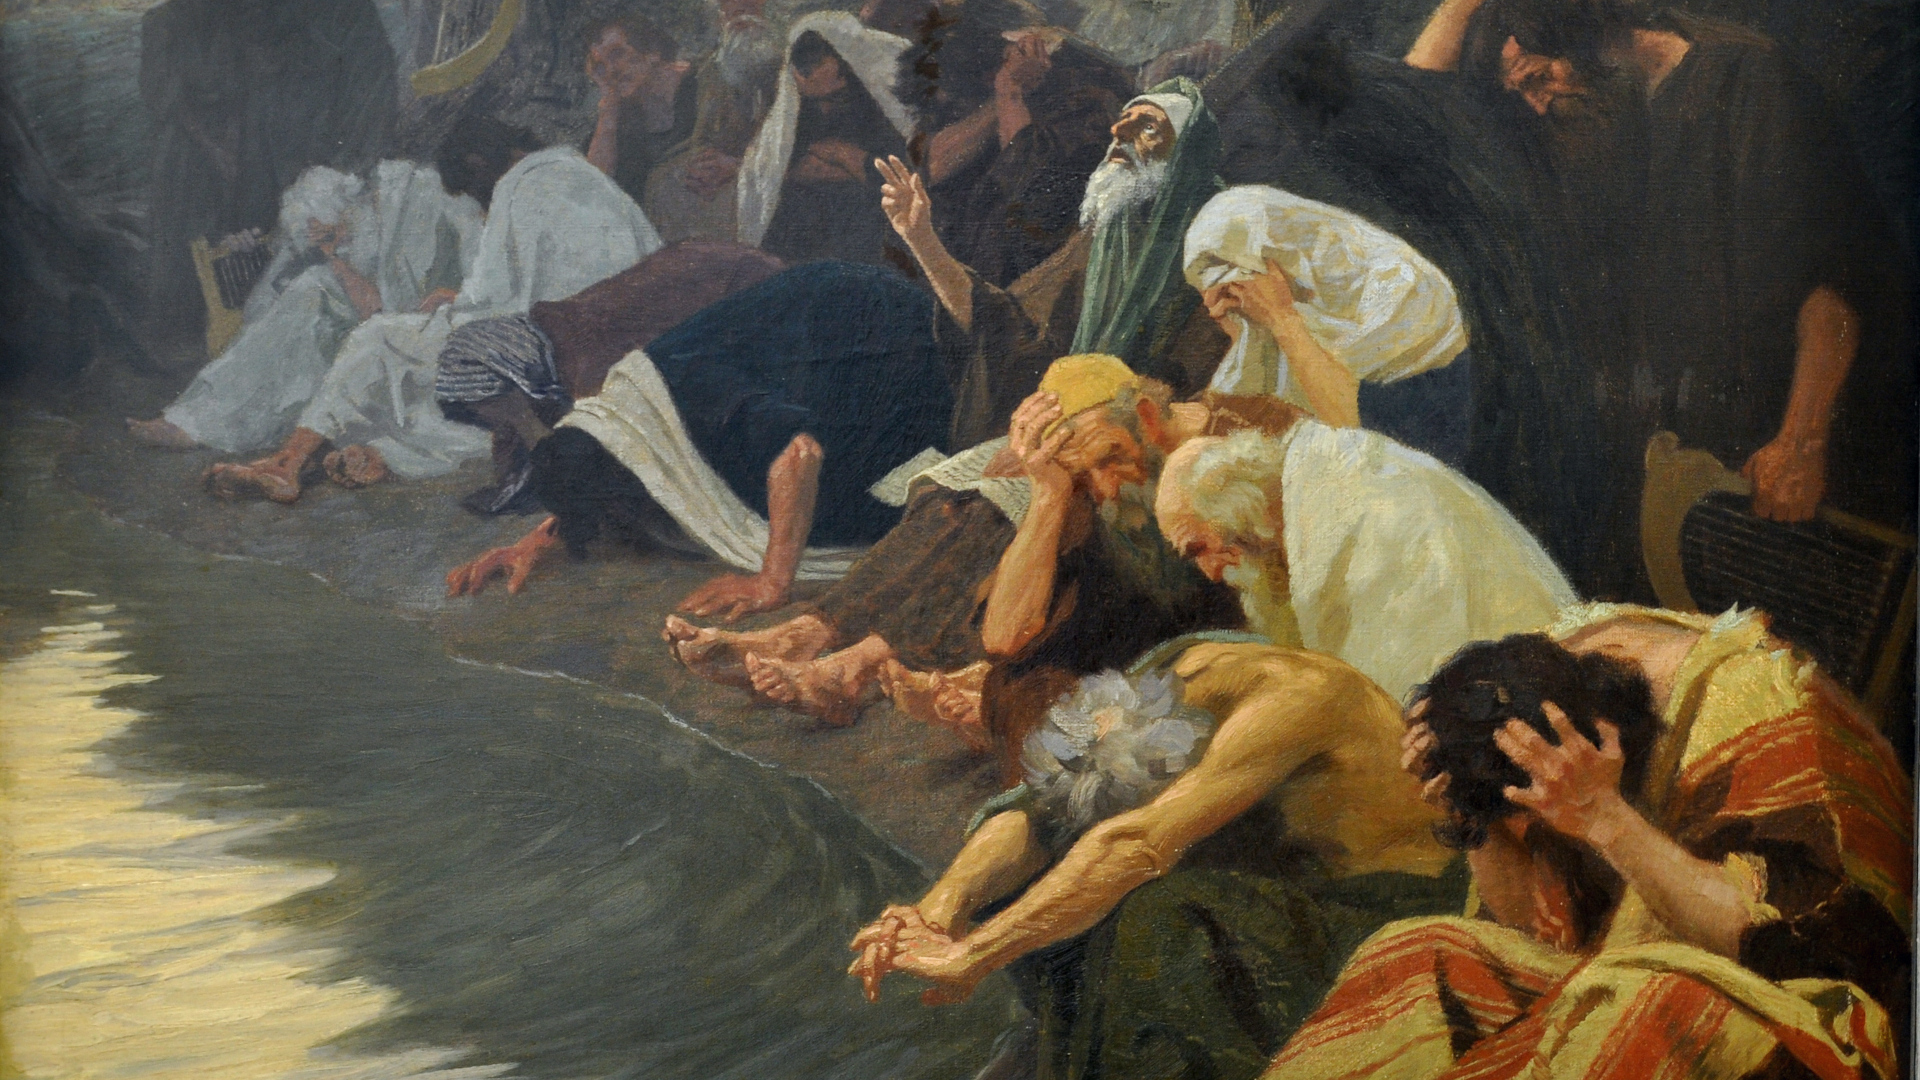 “At the Waters of Babylon” by Gebhard Fugel. Public Domain Image.